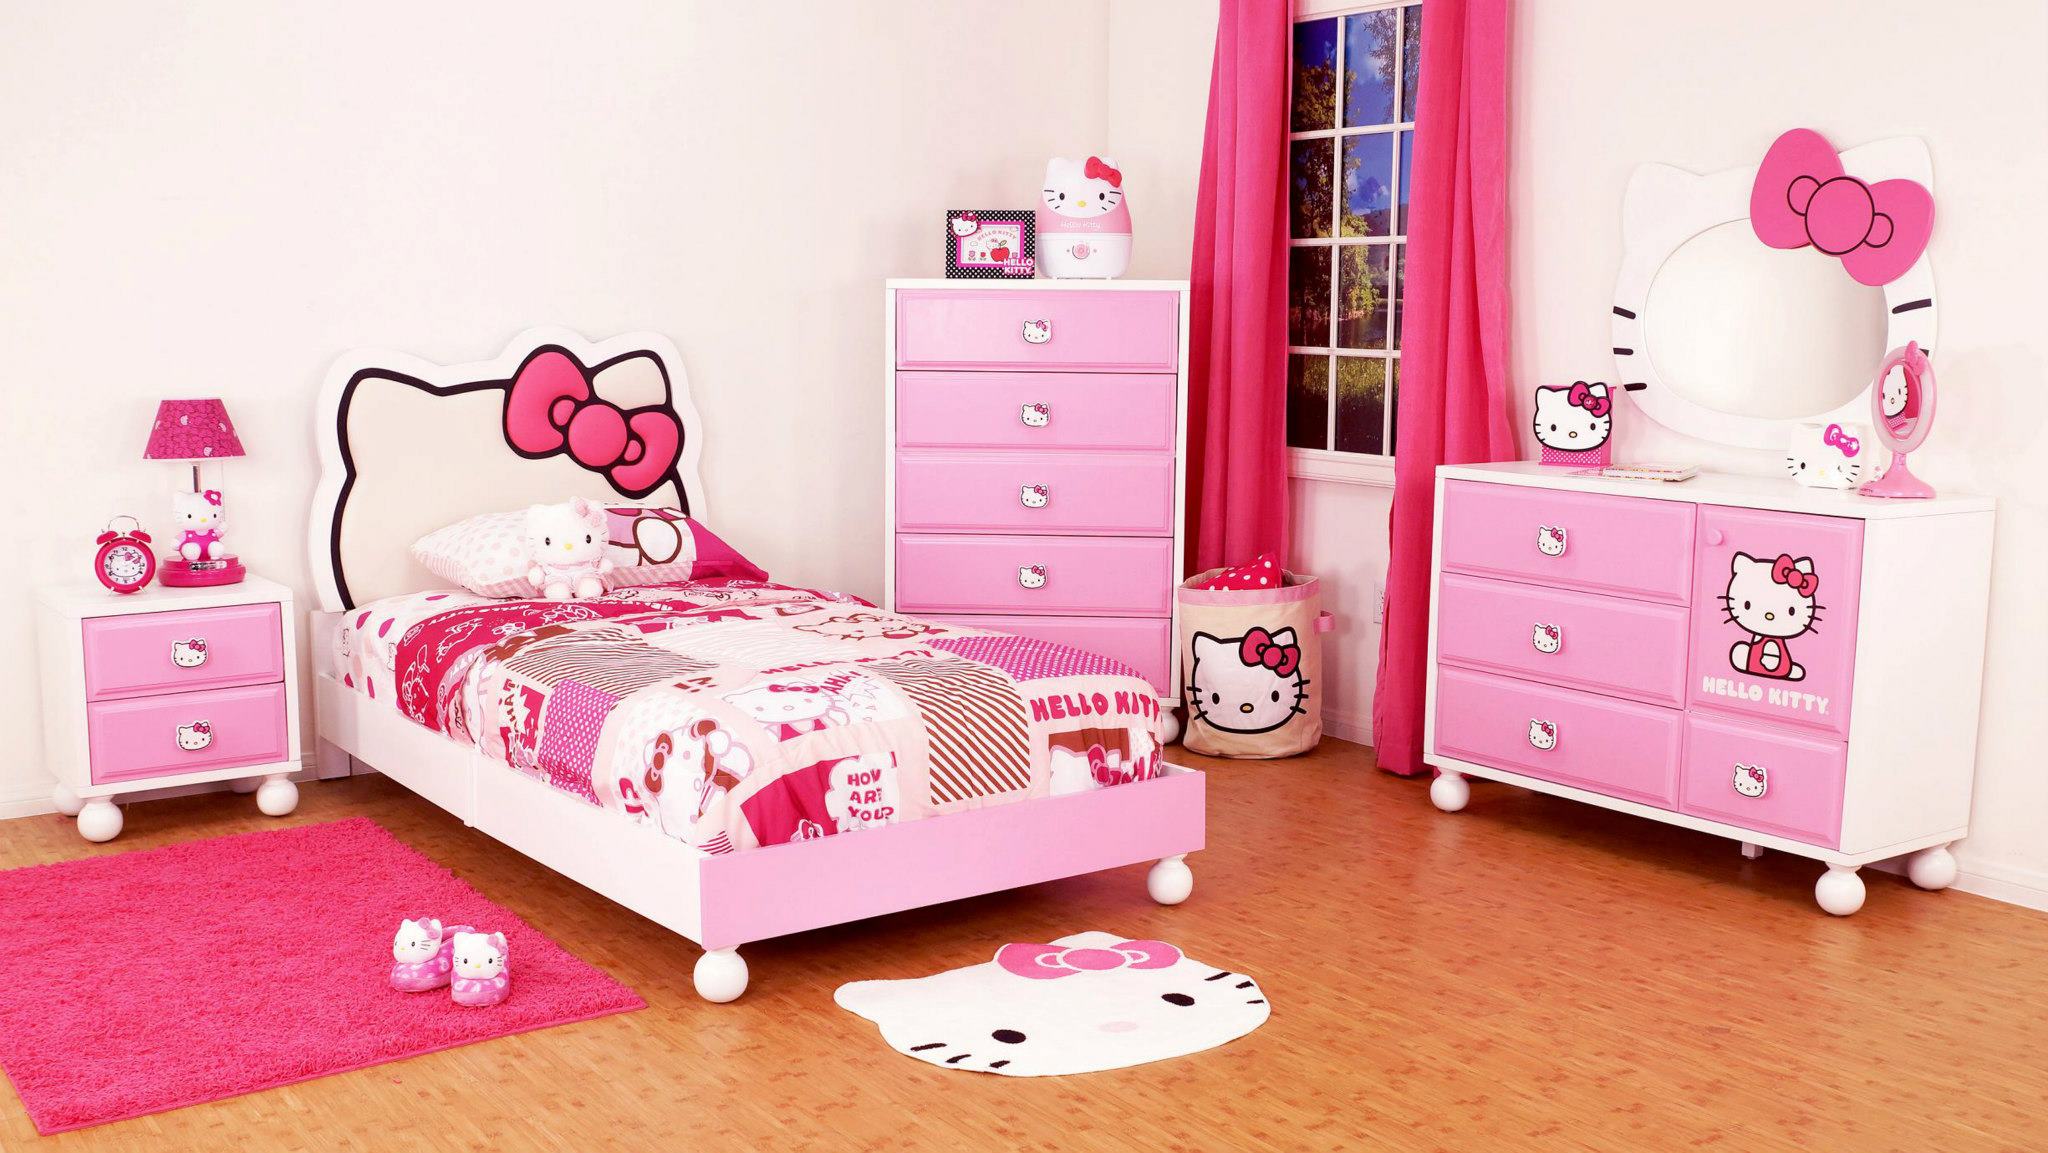 Bedroom Cute Kids Bedrooms Ideas Bedroom Designs Furniture Best Stores Small Decorating Simple Good Home Interior Design Room Furniture With Hello Kitty Ornaments Choosing Kids Bedroom Furniture That Good And Safe For Kids